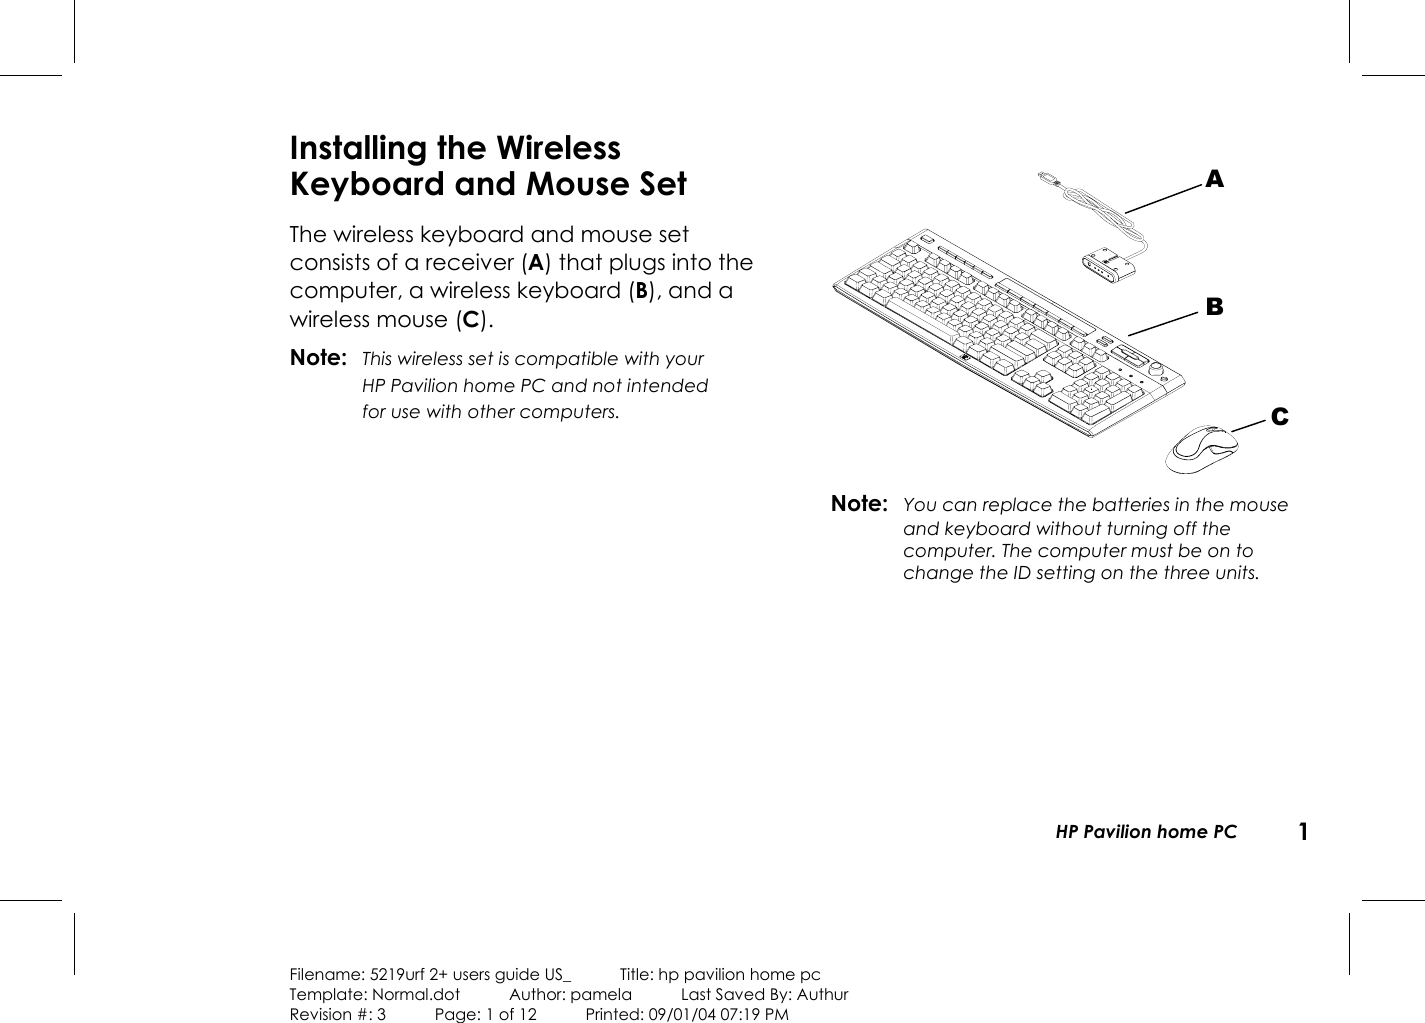   HP Pavilion home PC  1  Filename: 5219urf 2+ users guide US_            Title: hp pavilion home pc Template: Normal.dot      Author: pamela      Last Saved By: Authur Revision #: 3      Page: 1 of 12      Printed: 09/01/04 07:19 PM Installing the Wireless Keyboard and Mouse Set The wireless keyboard and mouse set consists of a receiver (A) that plugs into the computer, a wireless keyboard (B), and a wireless mouse (C). Note: This wireless set is compatible with your HP Pavilion home PC and not intended for use with other computers.   Note:  You can replace the batteries in the mouse and keyboard without turning off the computer. The computer must be on to change the ID setting on the three units. A B C 